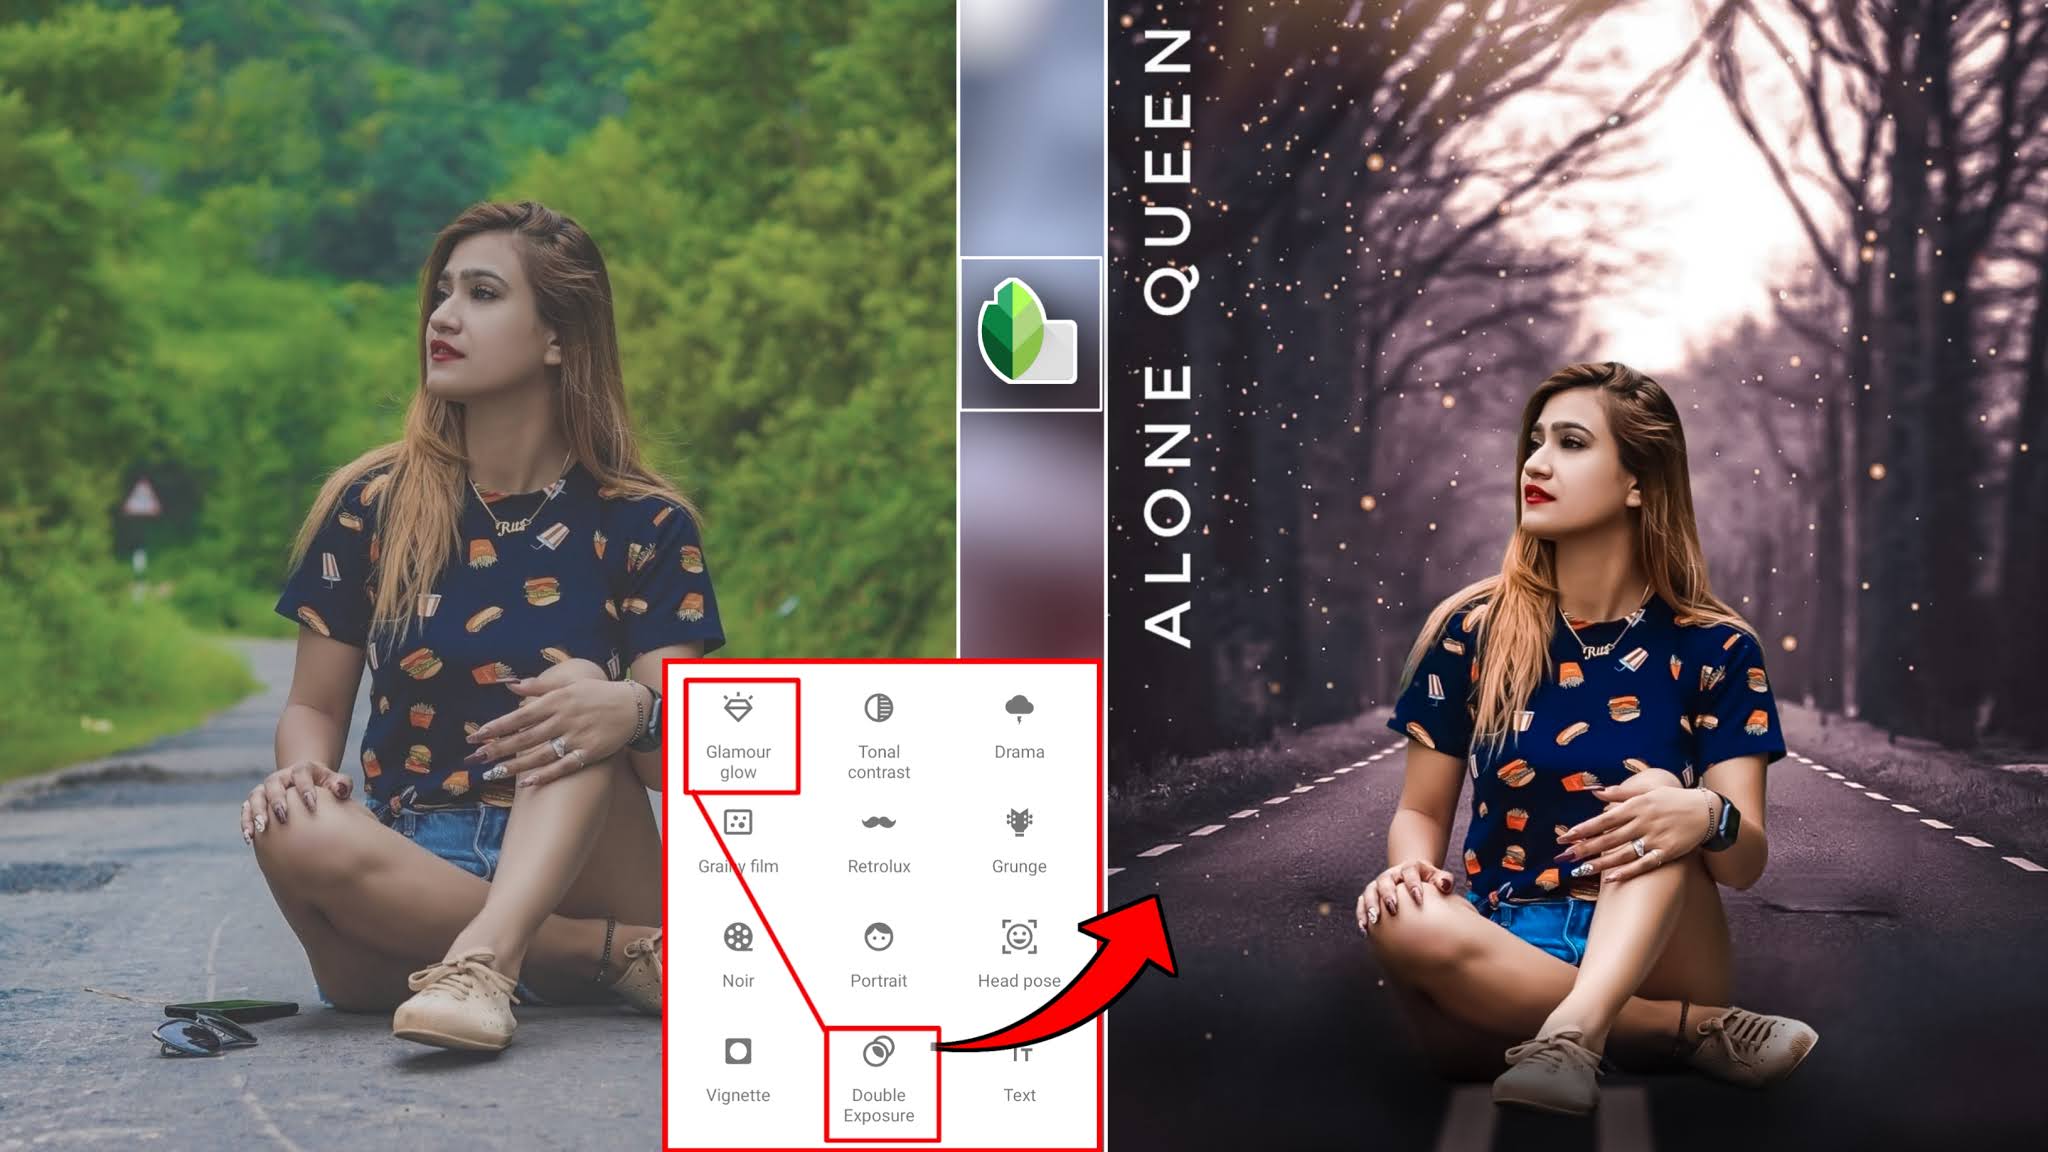 NEW SNAPSEED BACKGROUND CHANGE PHOTO EDITING TUTORIAL || FREE DOWNLOAD